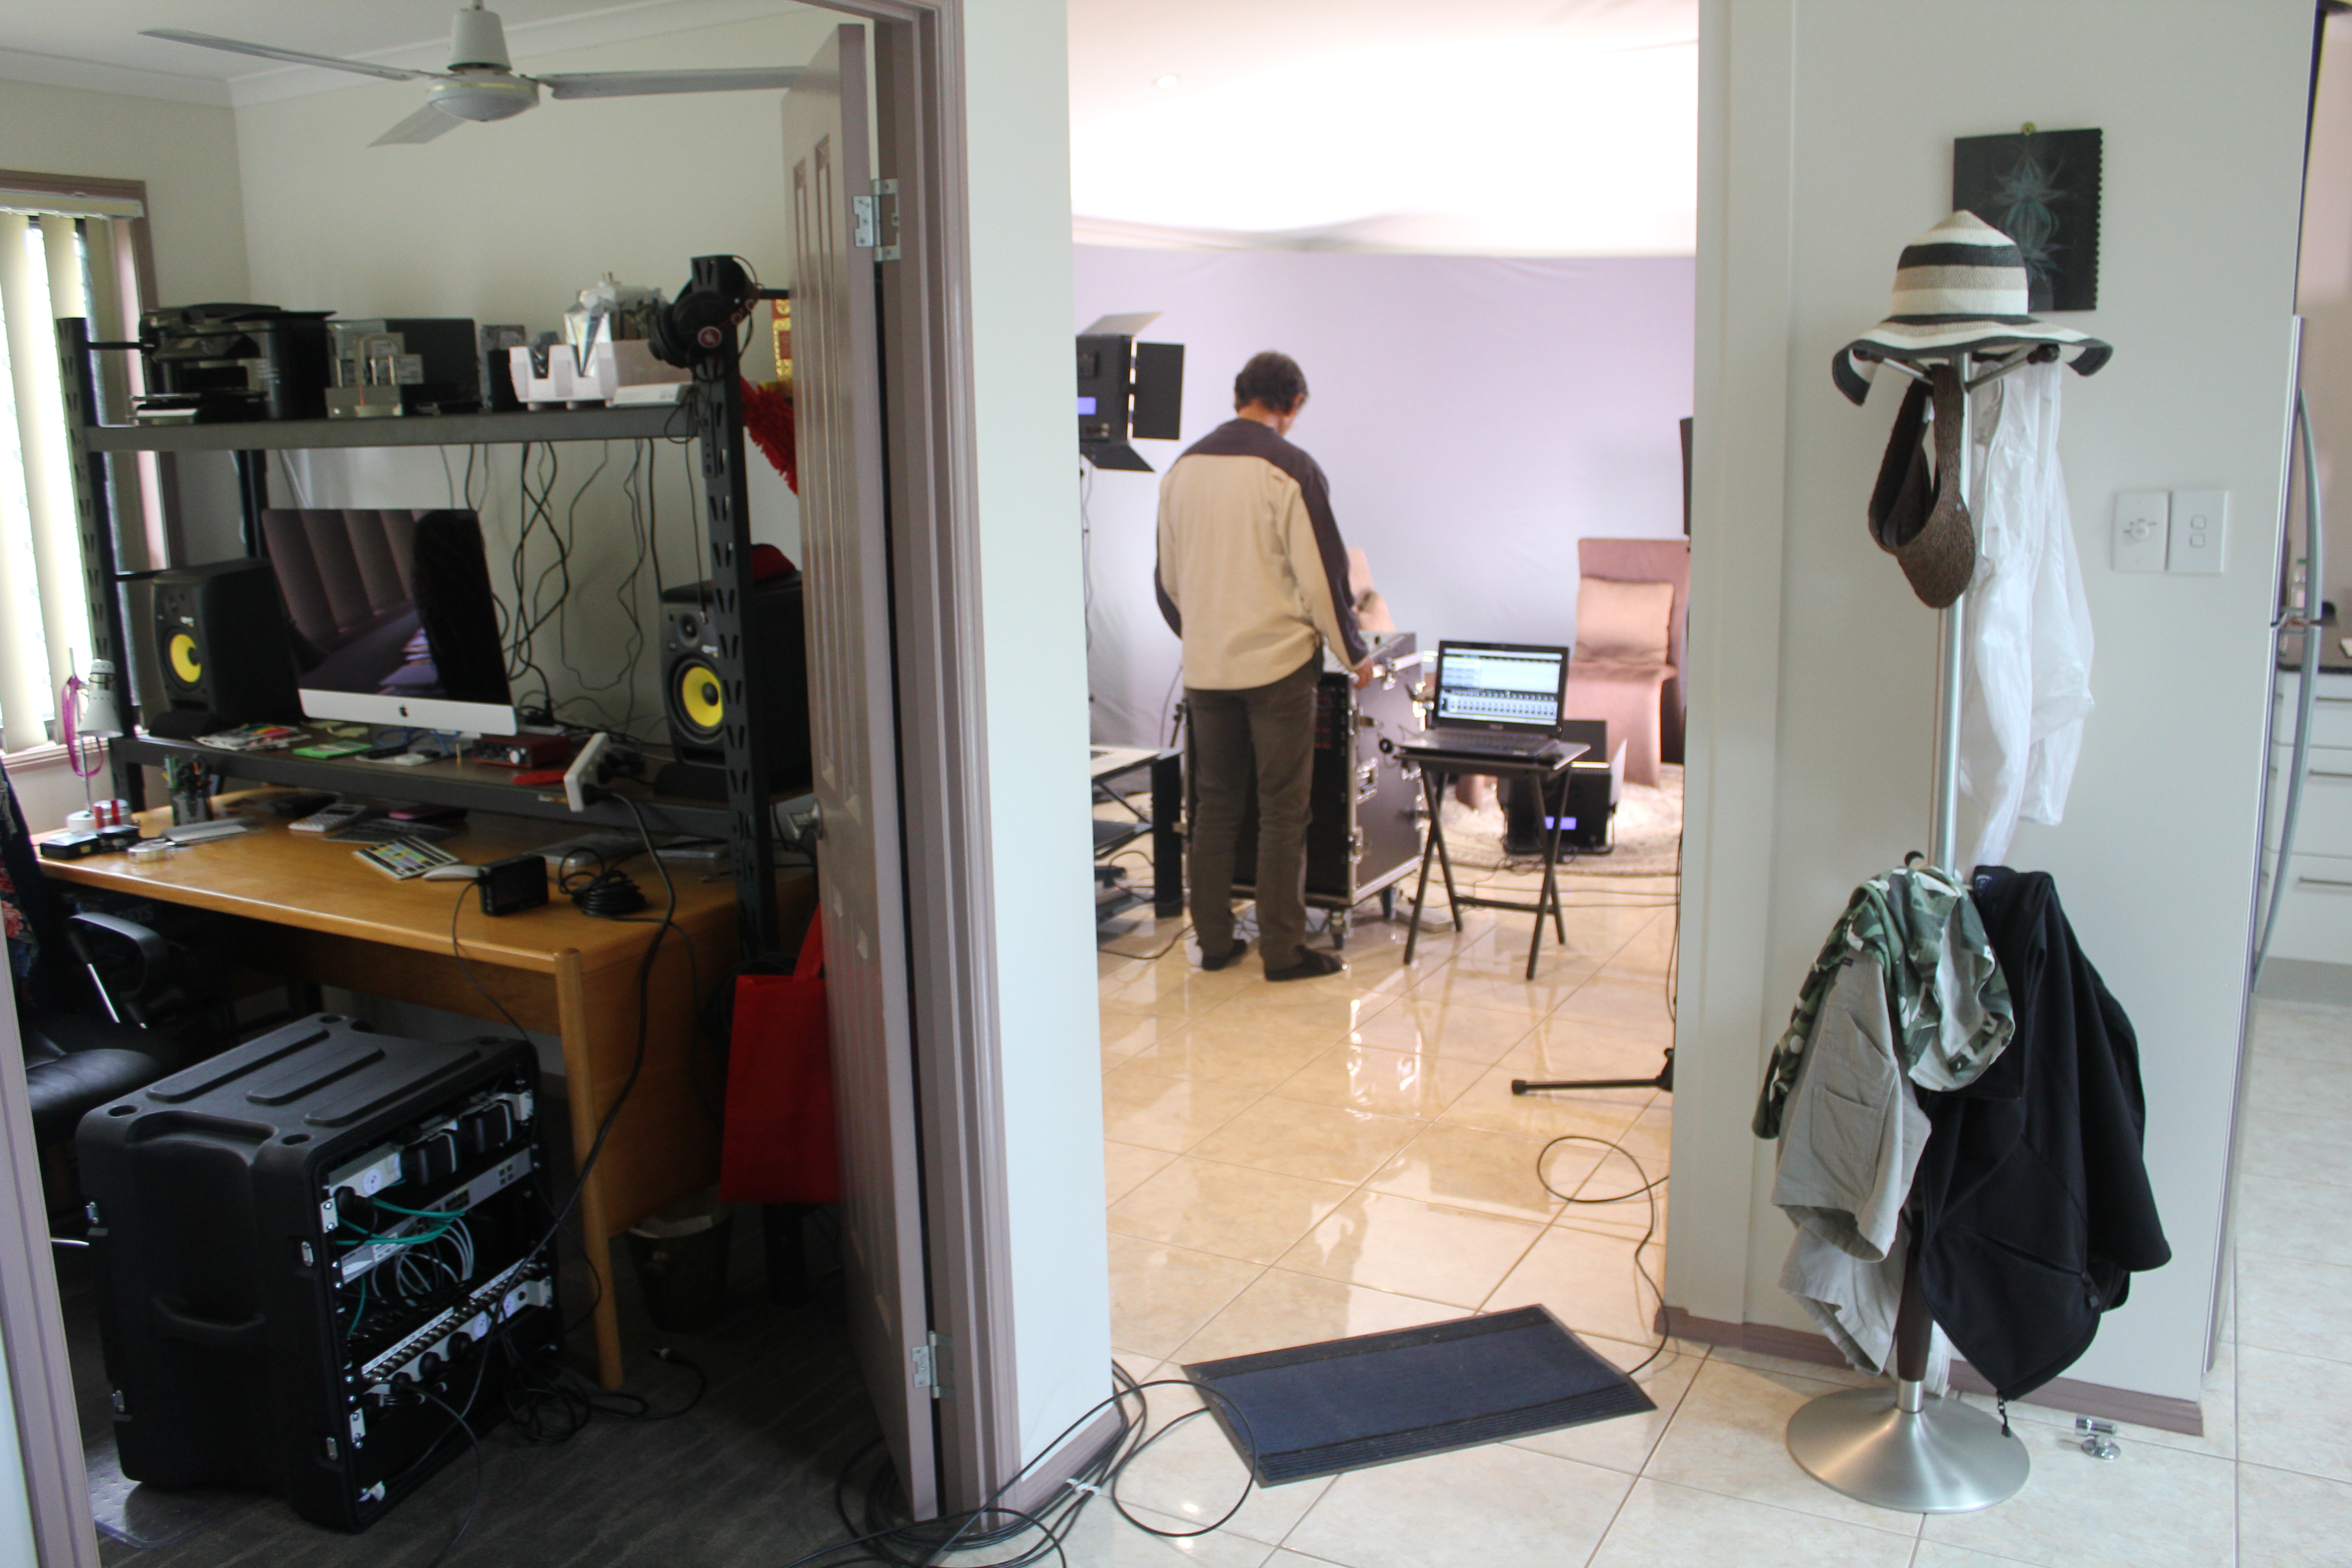 Editing equipment and filming set-up in Lena & Igor's home